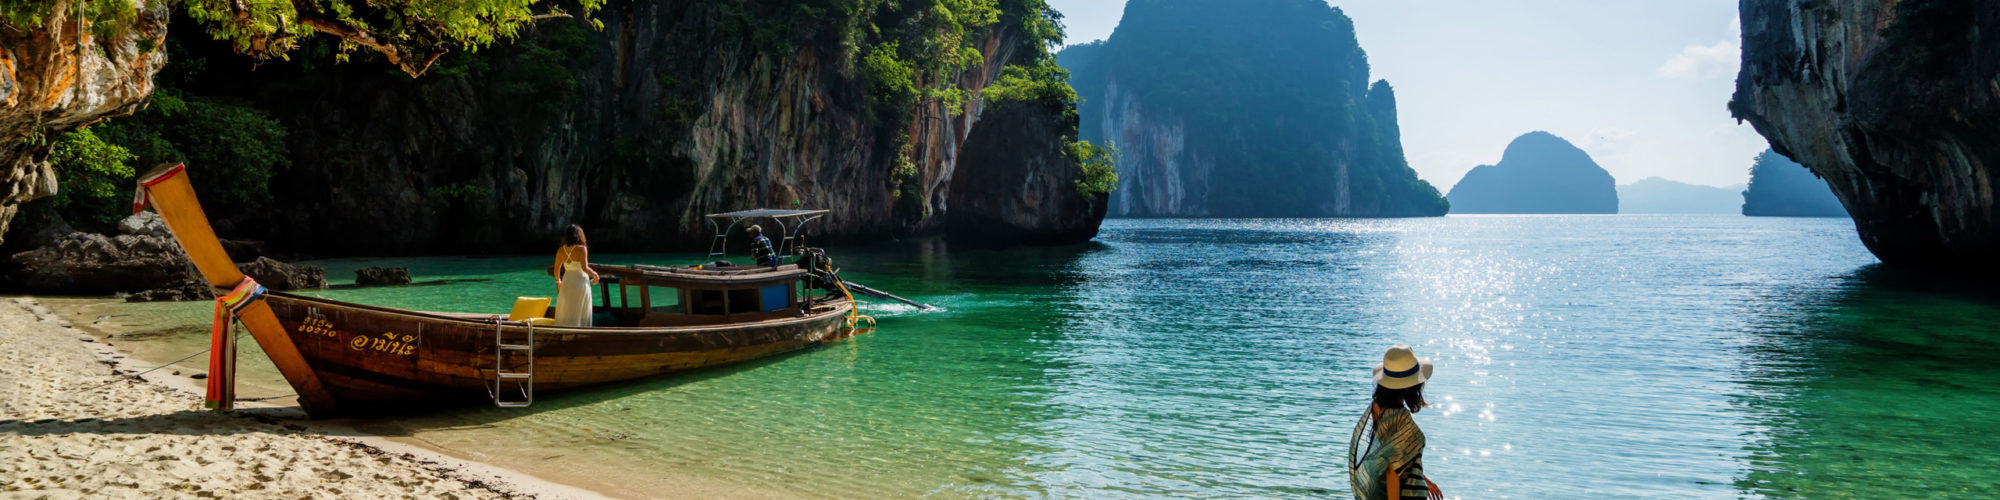 Koh Yao travel agents packages deals